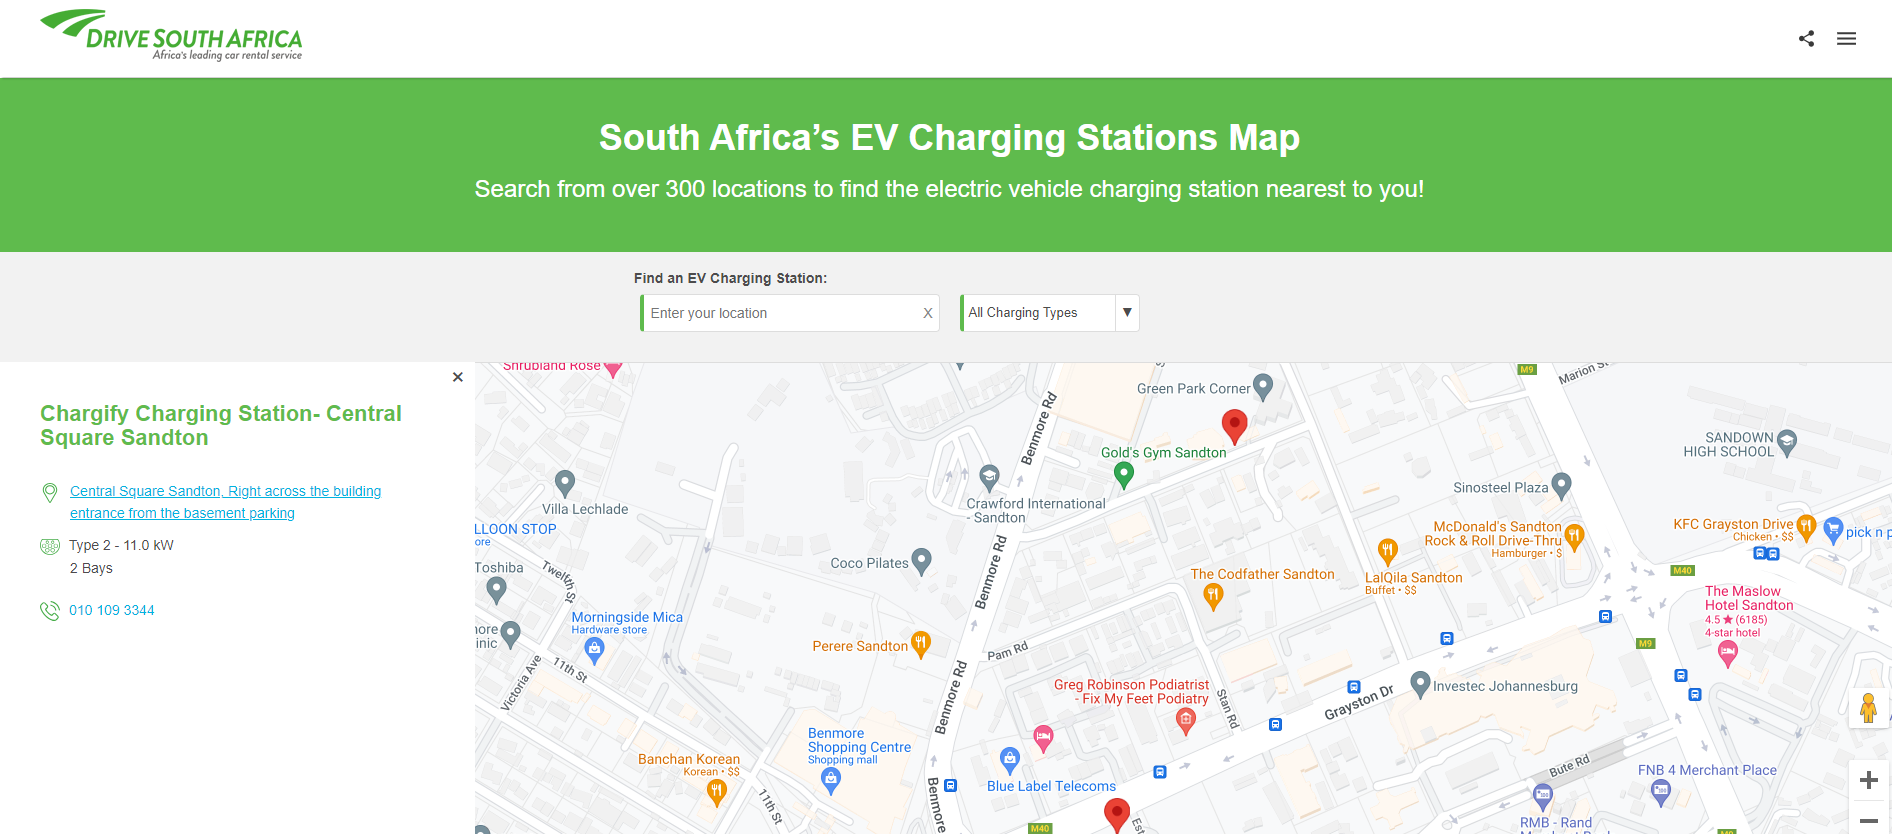 The Drive South Africa EV Charging Stations Map.